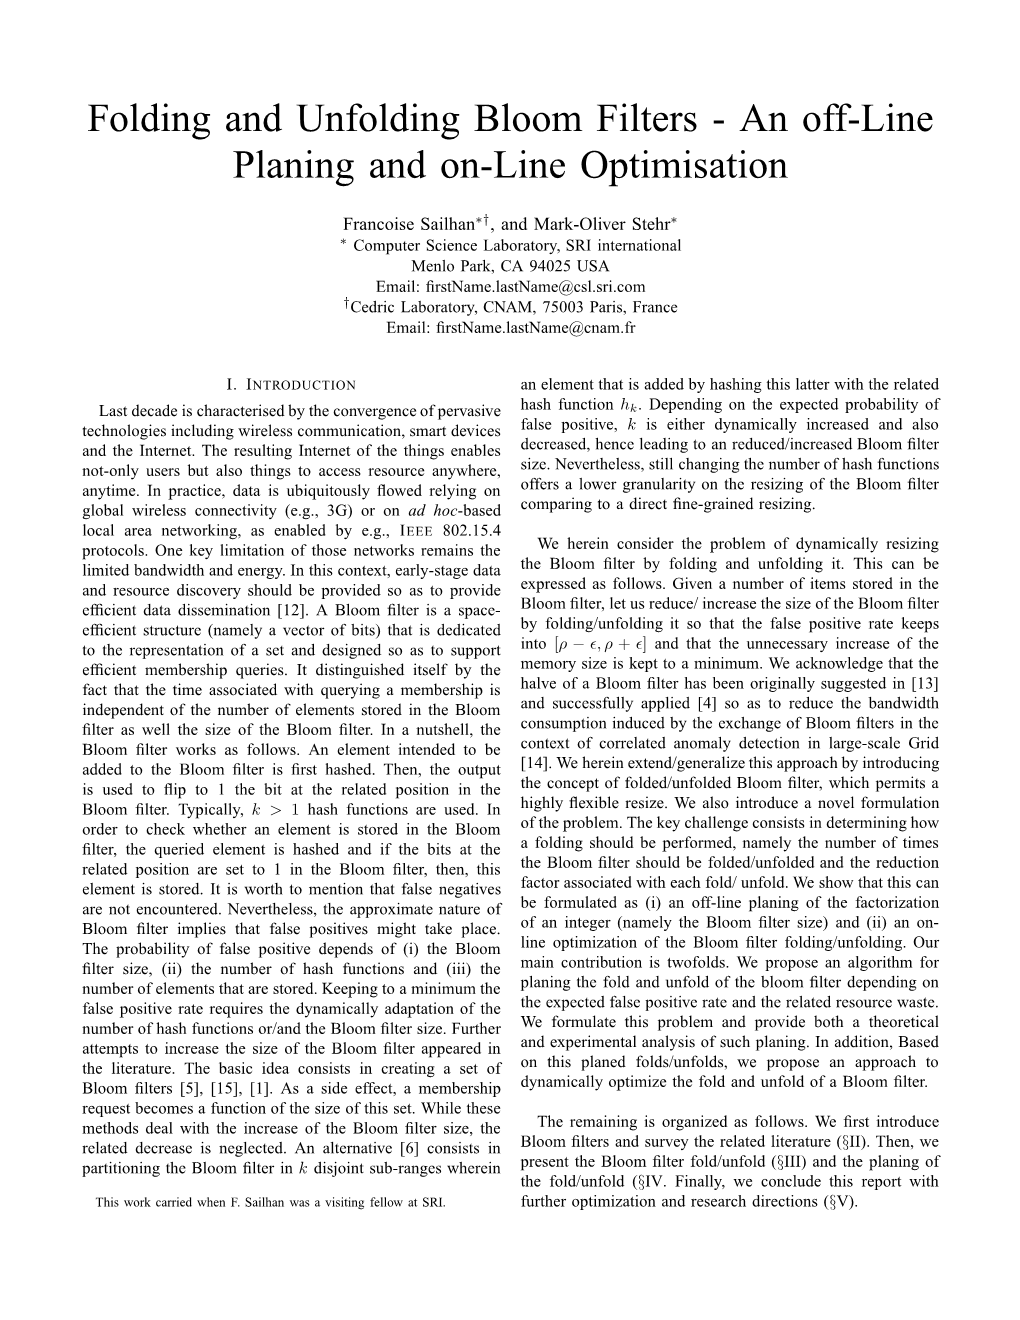 Folding and Unfolding Bloom Filters - an Off-Line Planing and On-Line Optimisation